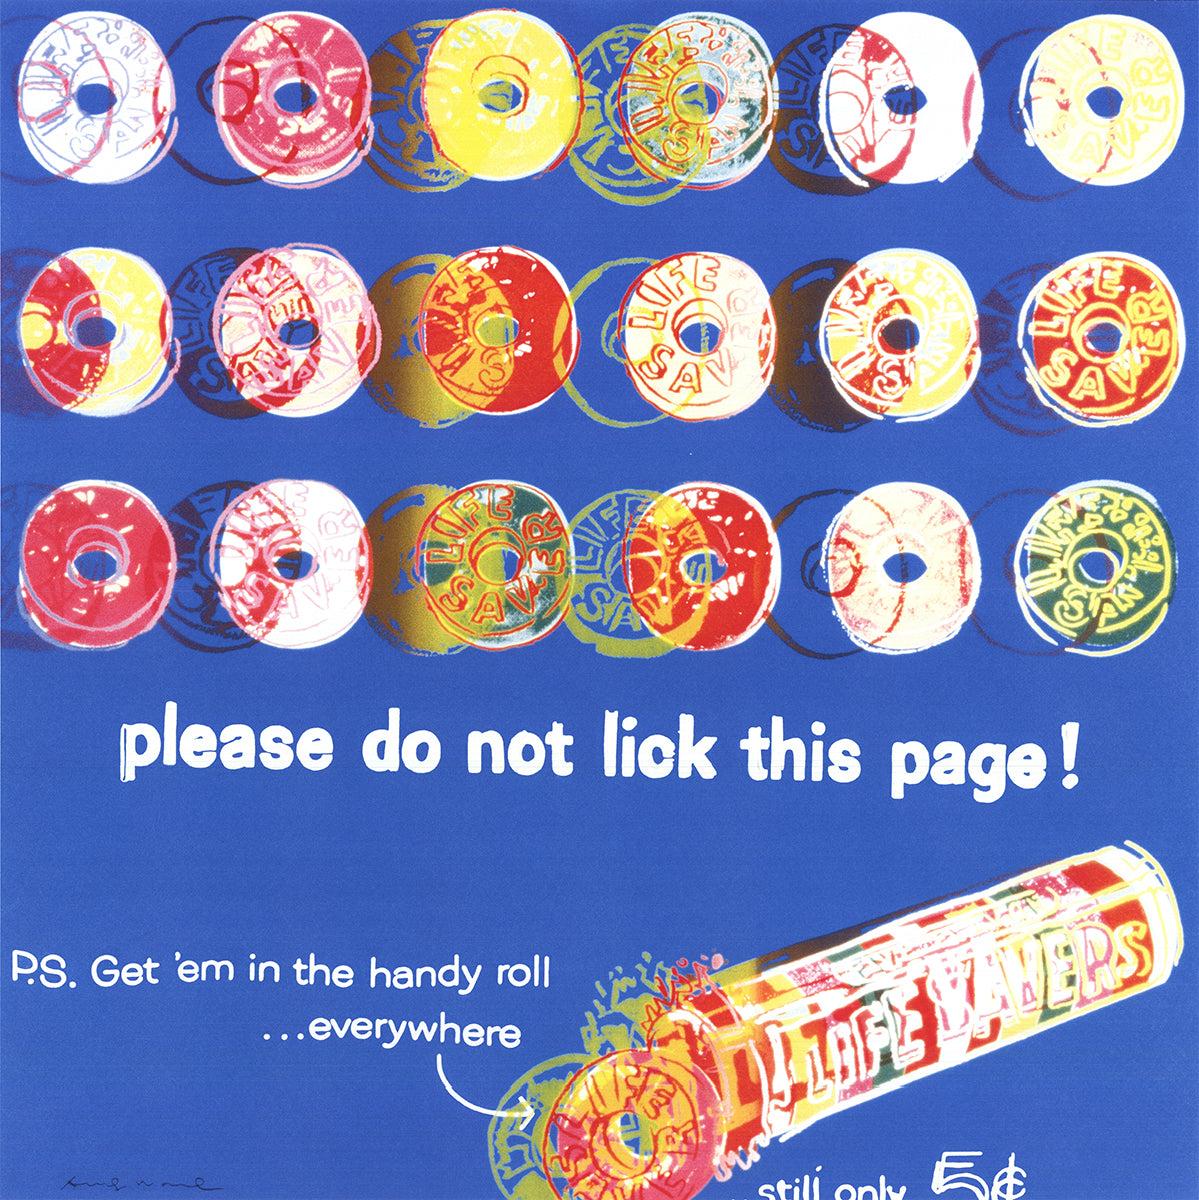 Andy After Warhol 'Ads: Life Savers Blue'  - Pop Art Print by Andy Warhol